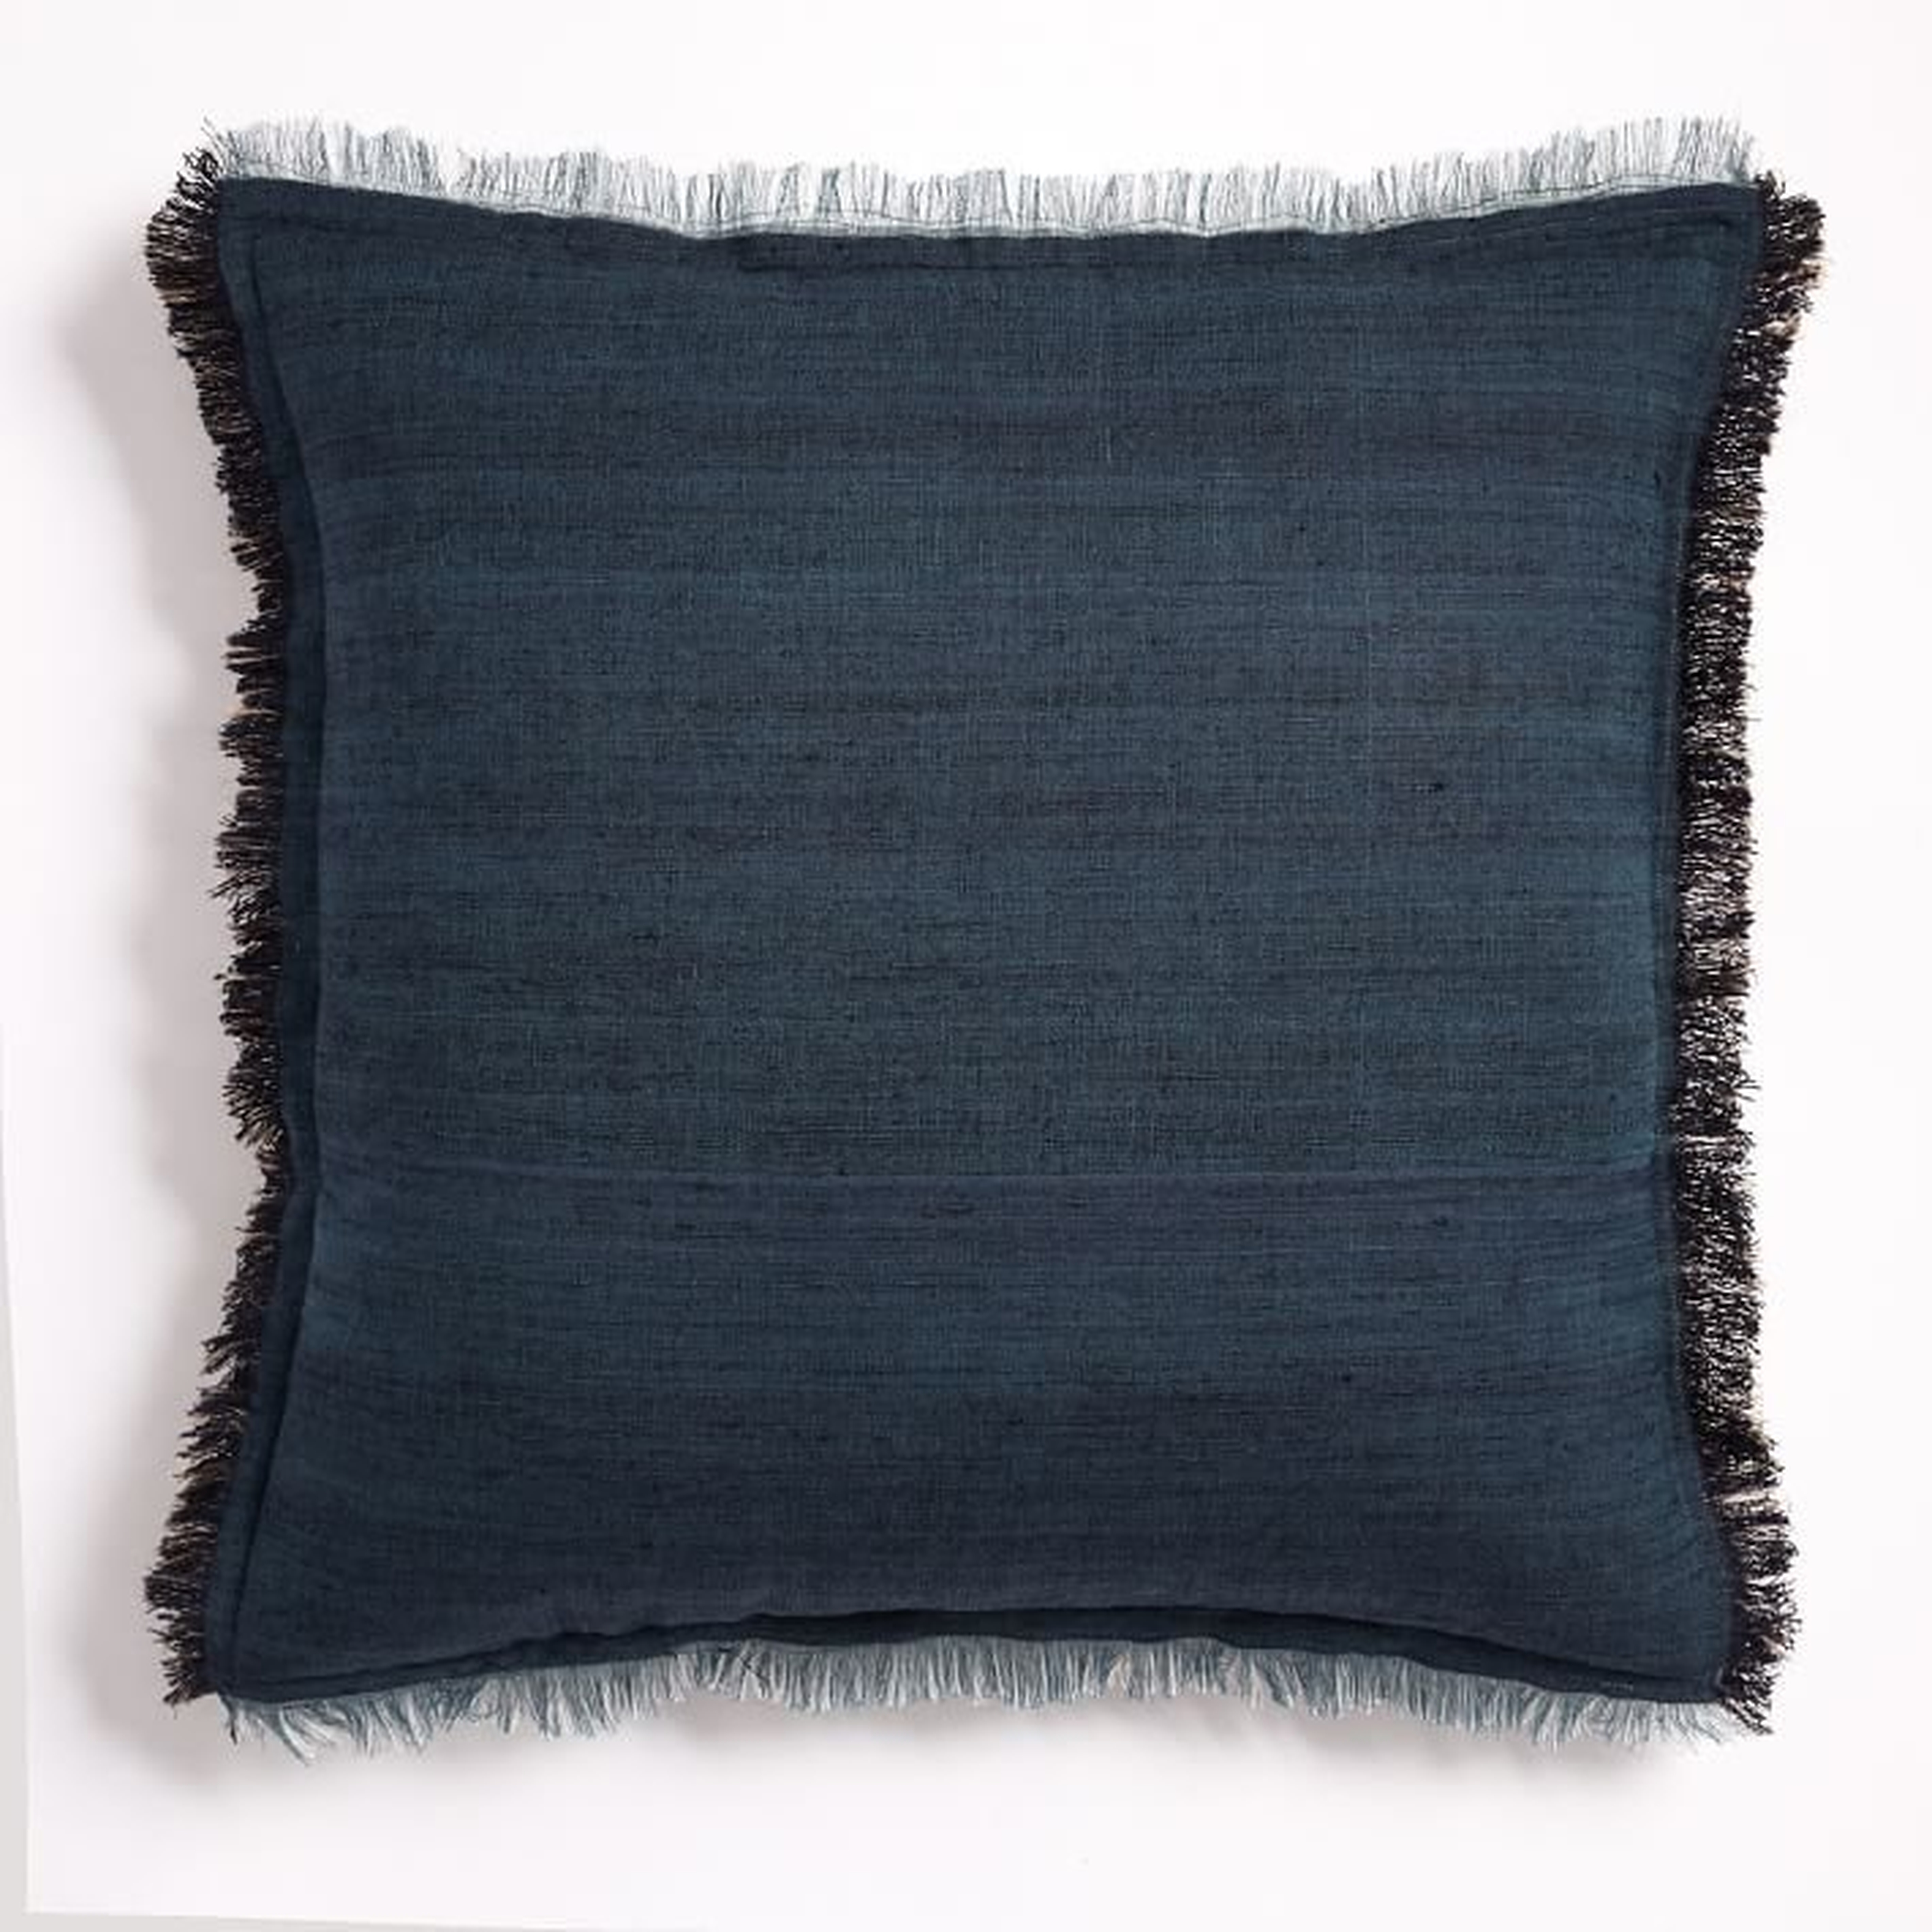 Textured Silk Fringe Pillow Cover - Shadow Blue - West Elm